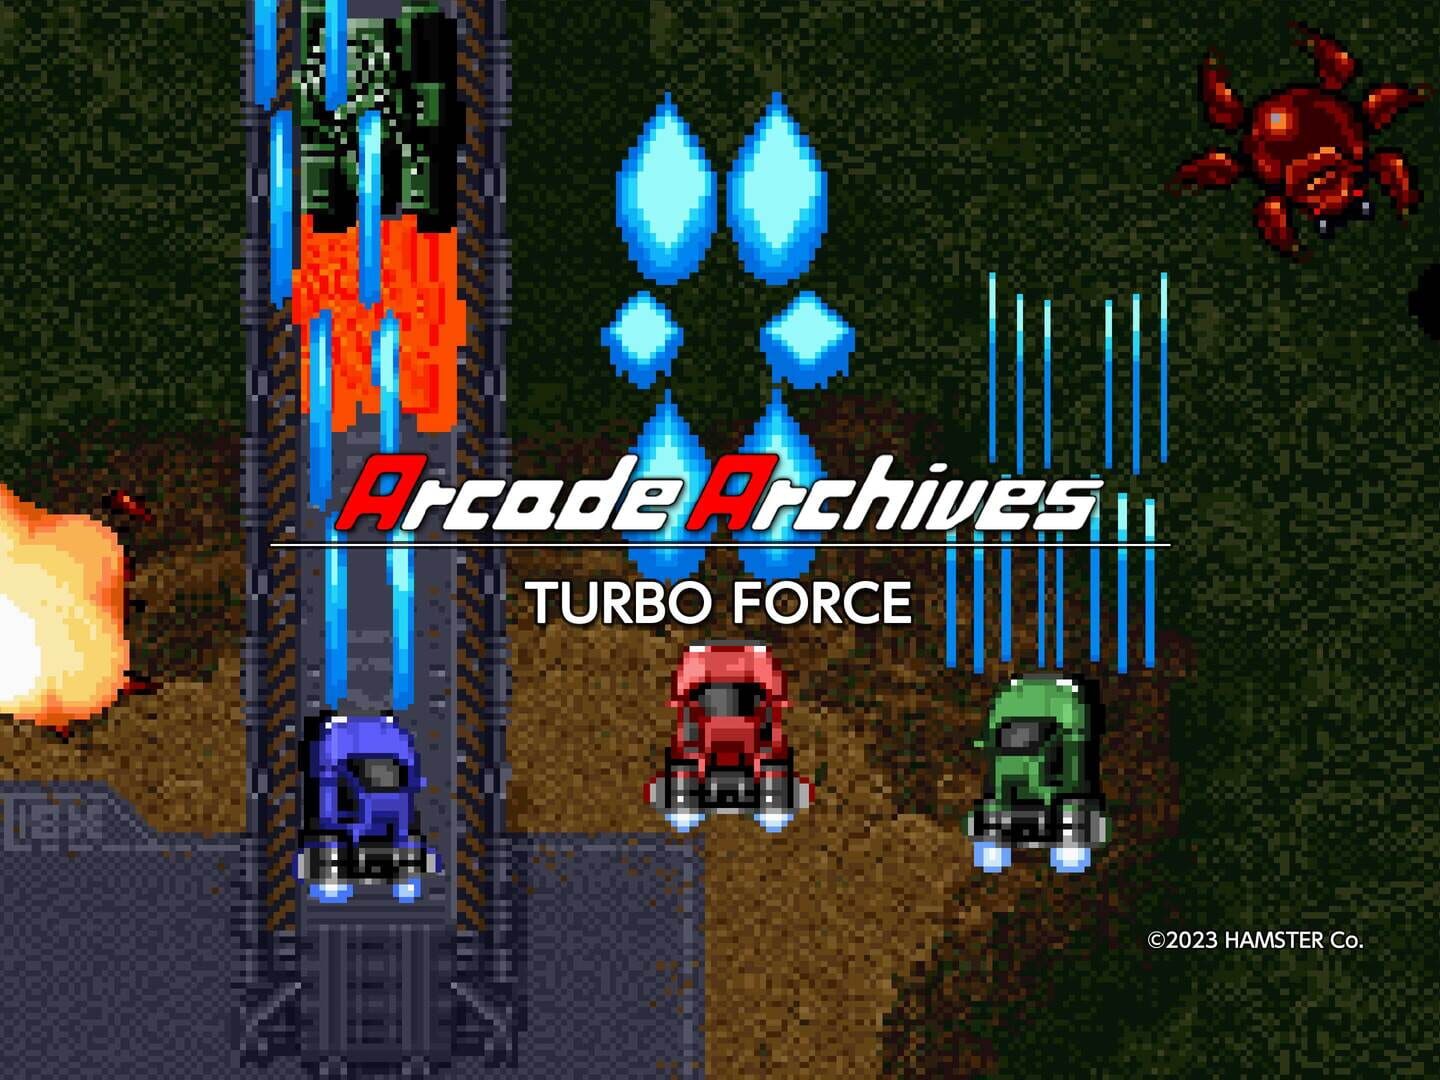 Arte - Arcade Archives: Turbo Force